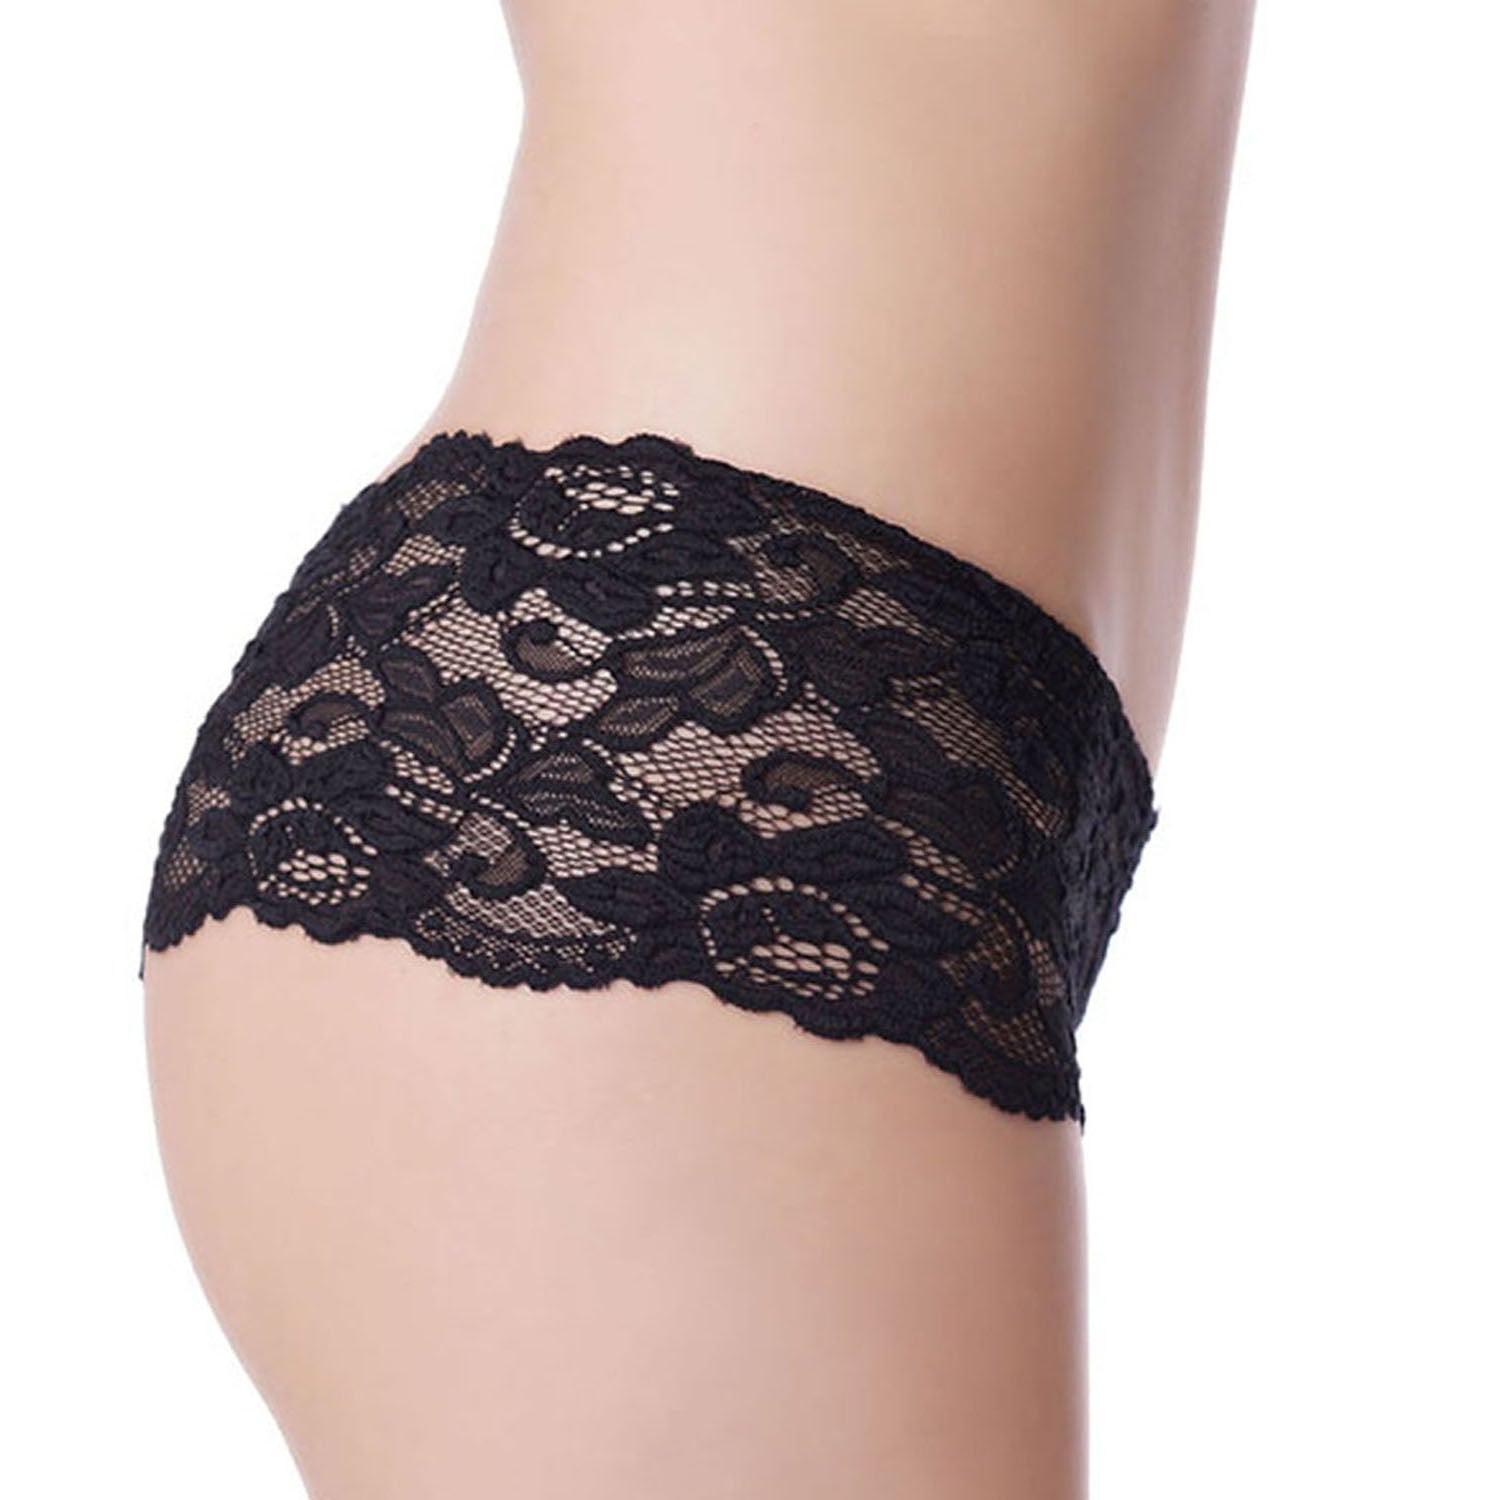 Floral Lace Scalloped French Knickers - Black